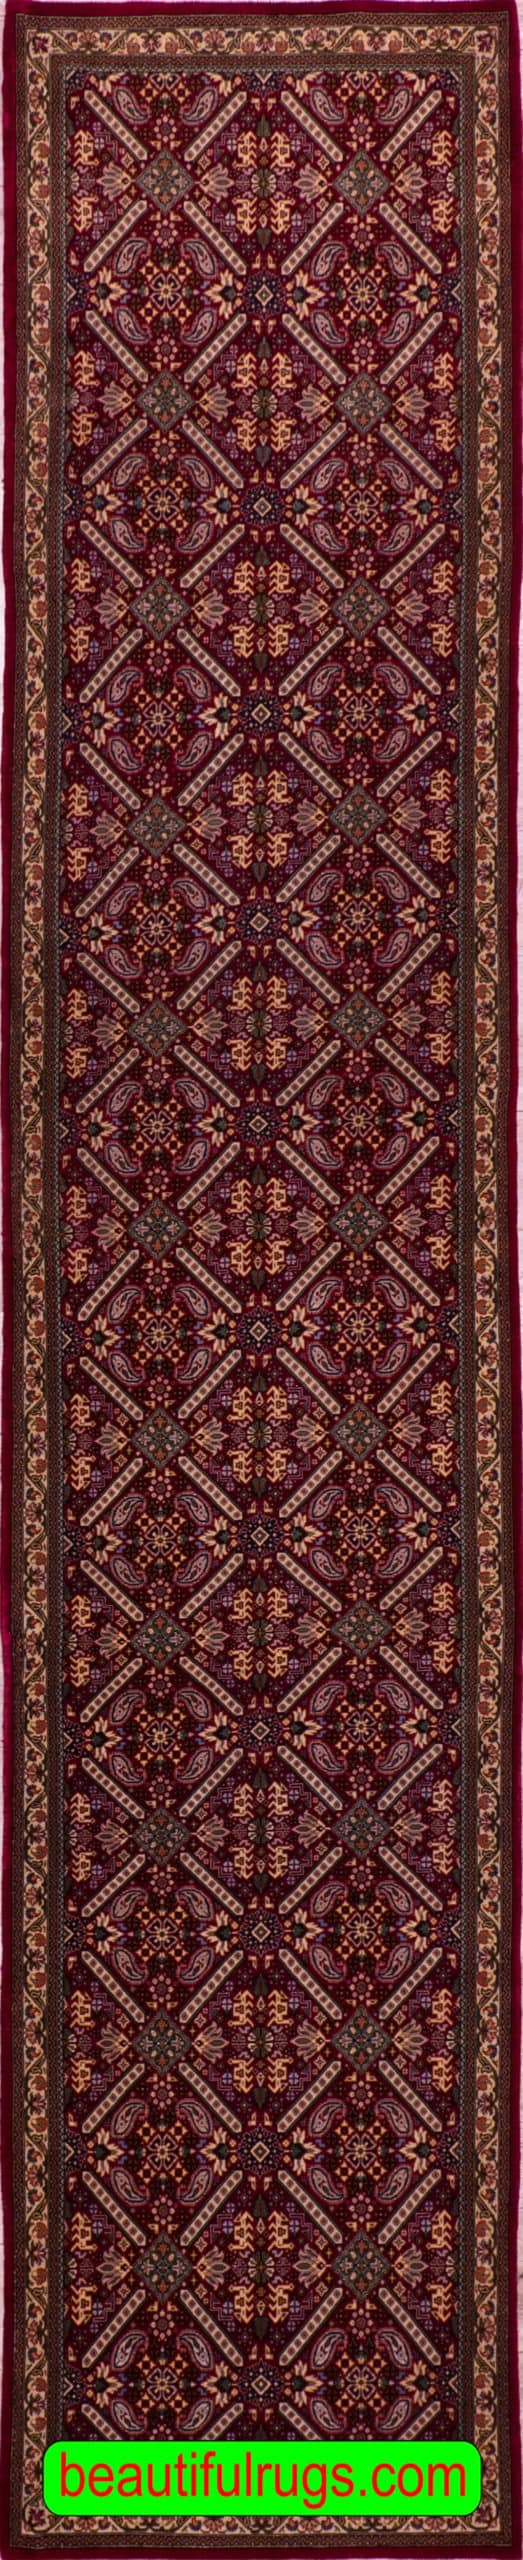 Persian Qum runner rug made of wool in red color. Size 2.10x13.6